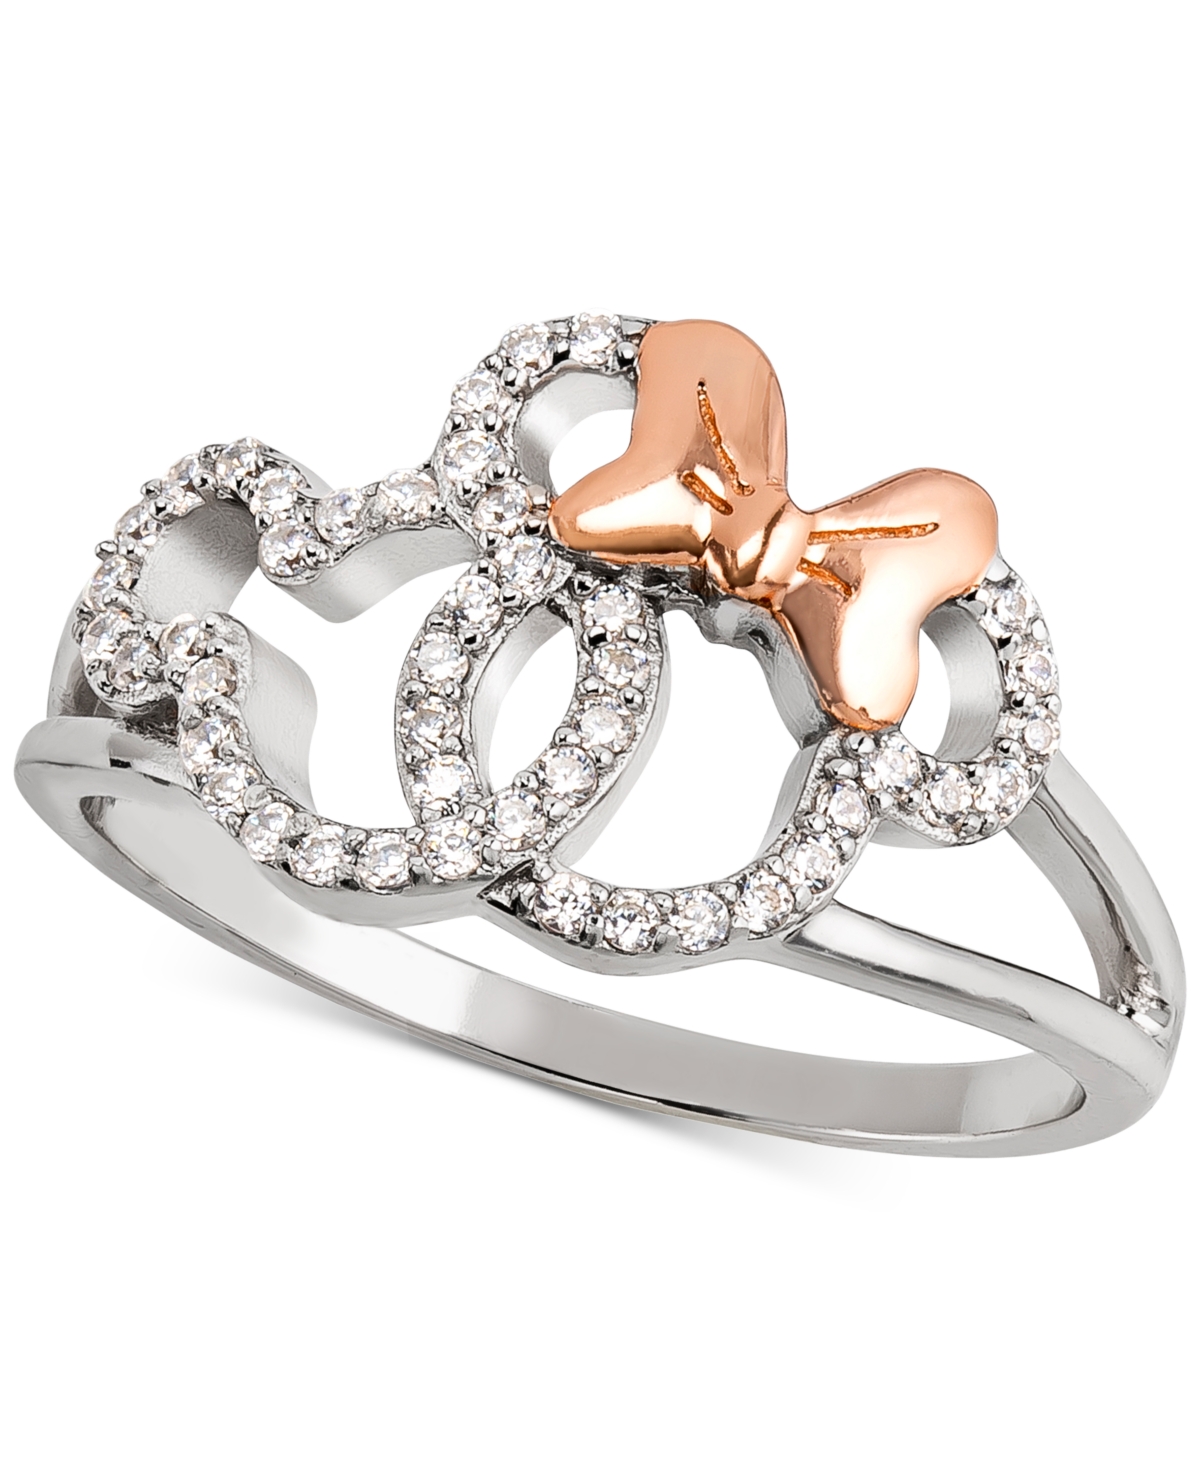 Cubic Zirconia Mickey & Minnie Openwork Ring in Sterling Silver & 18k Rose Gold-Plate - Silver